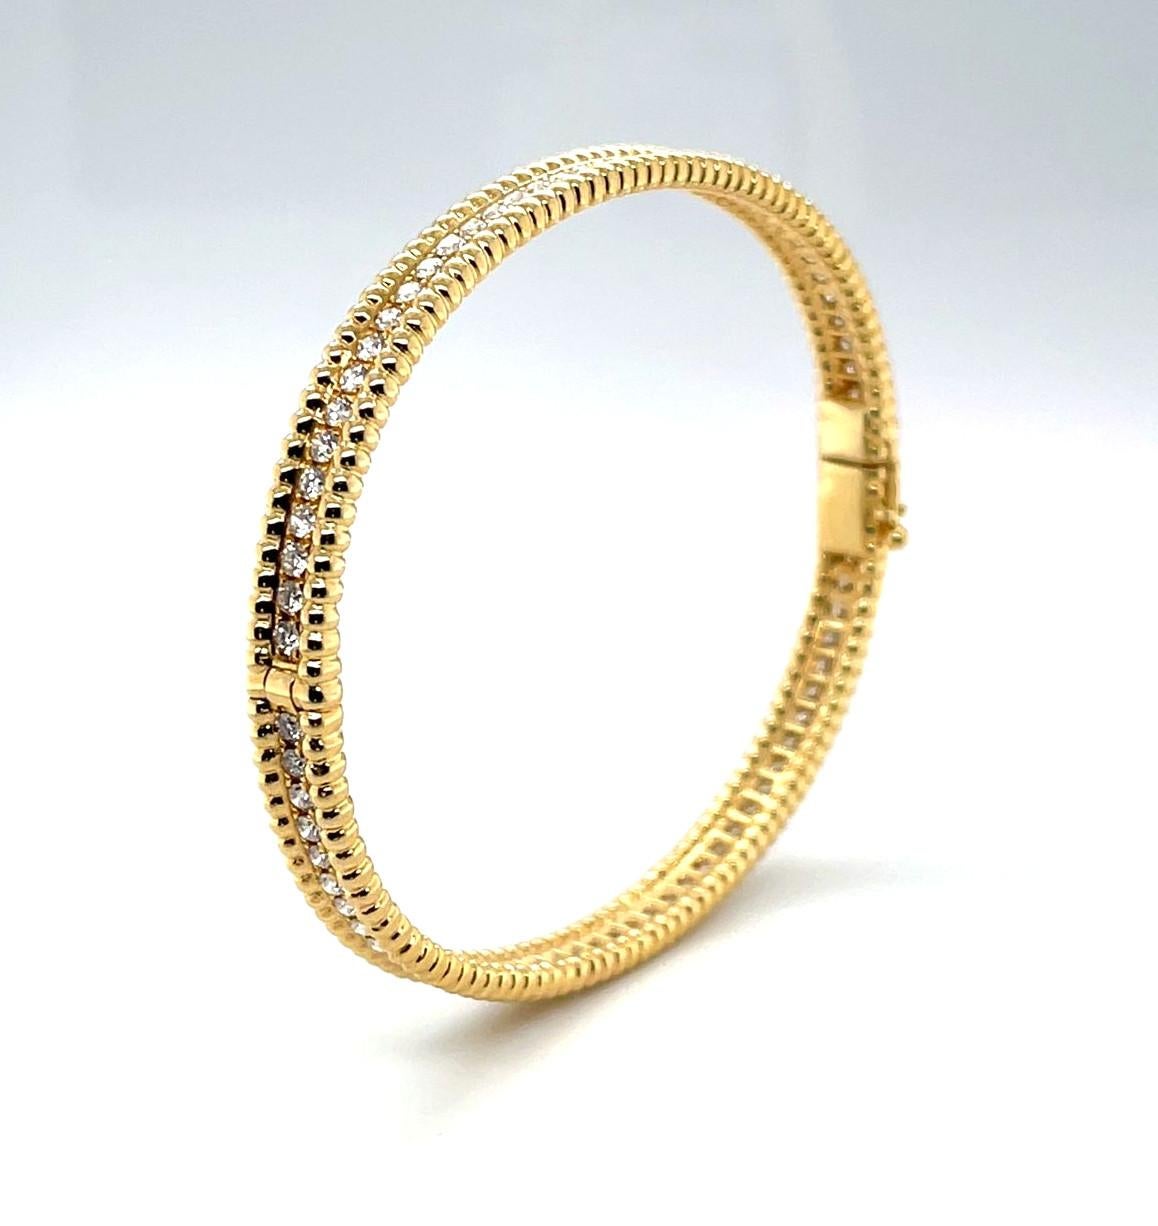 Diamond and 18k Yellow Gold Hinged Bangle Bracelet, 1.95 Carats Total For Sale 1